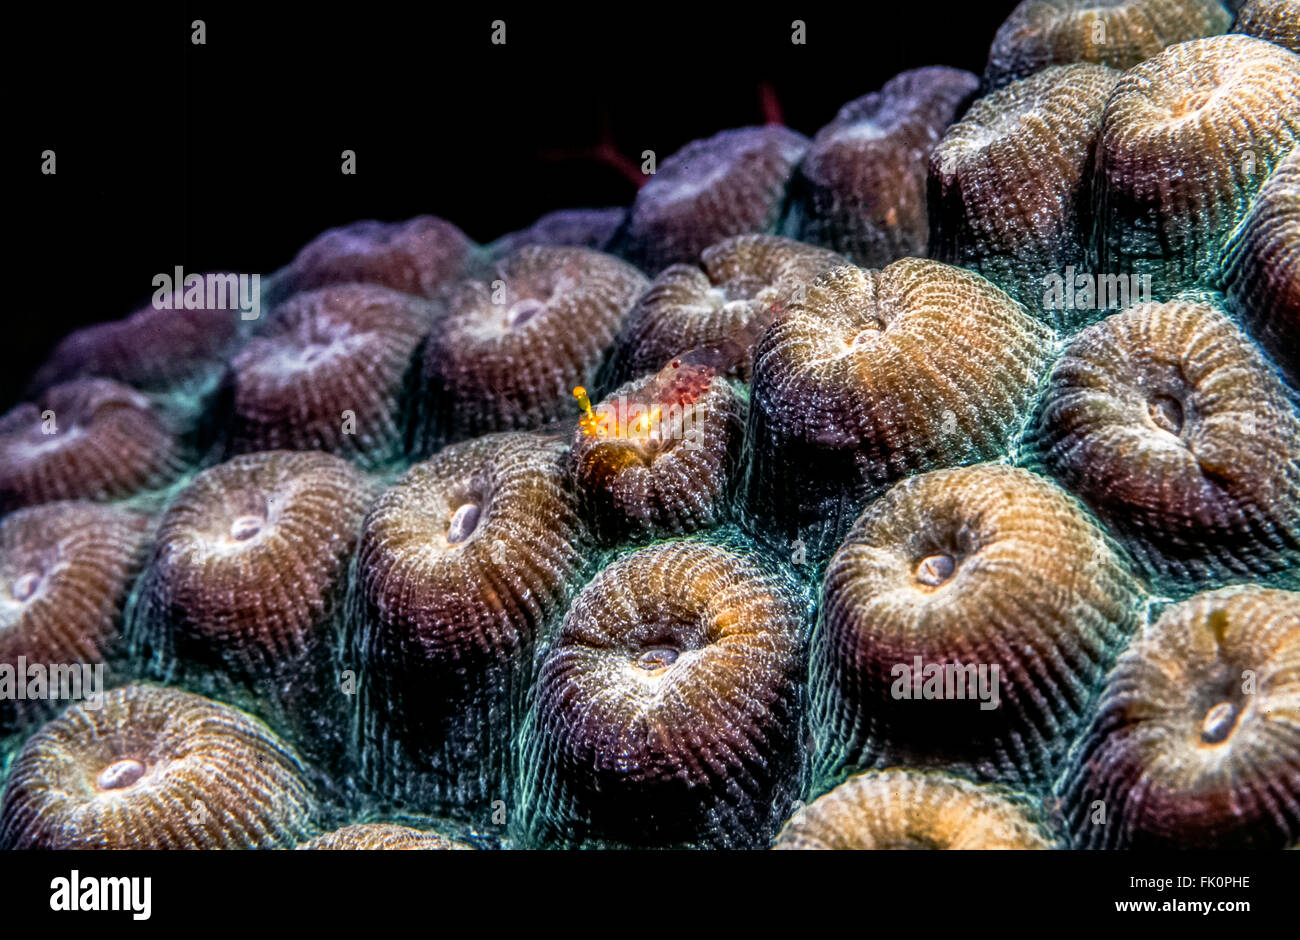 great star coral, Montastraea cavernosa, is a colonial stony coral found in the Caribbean seas with small shrimp Stock Photo